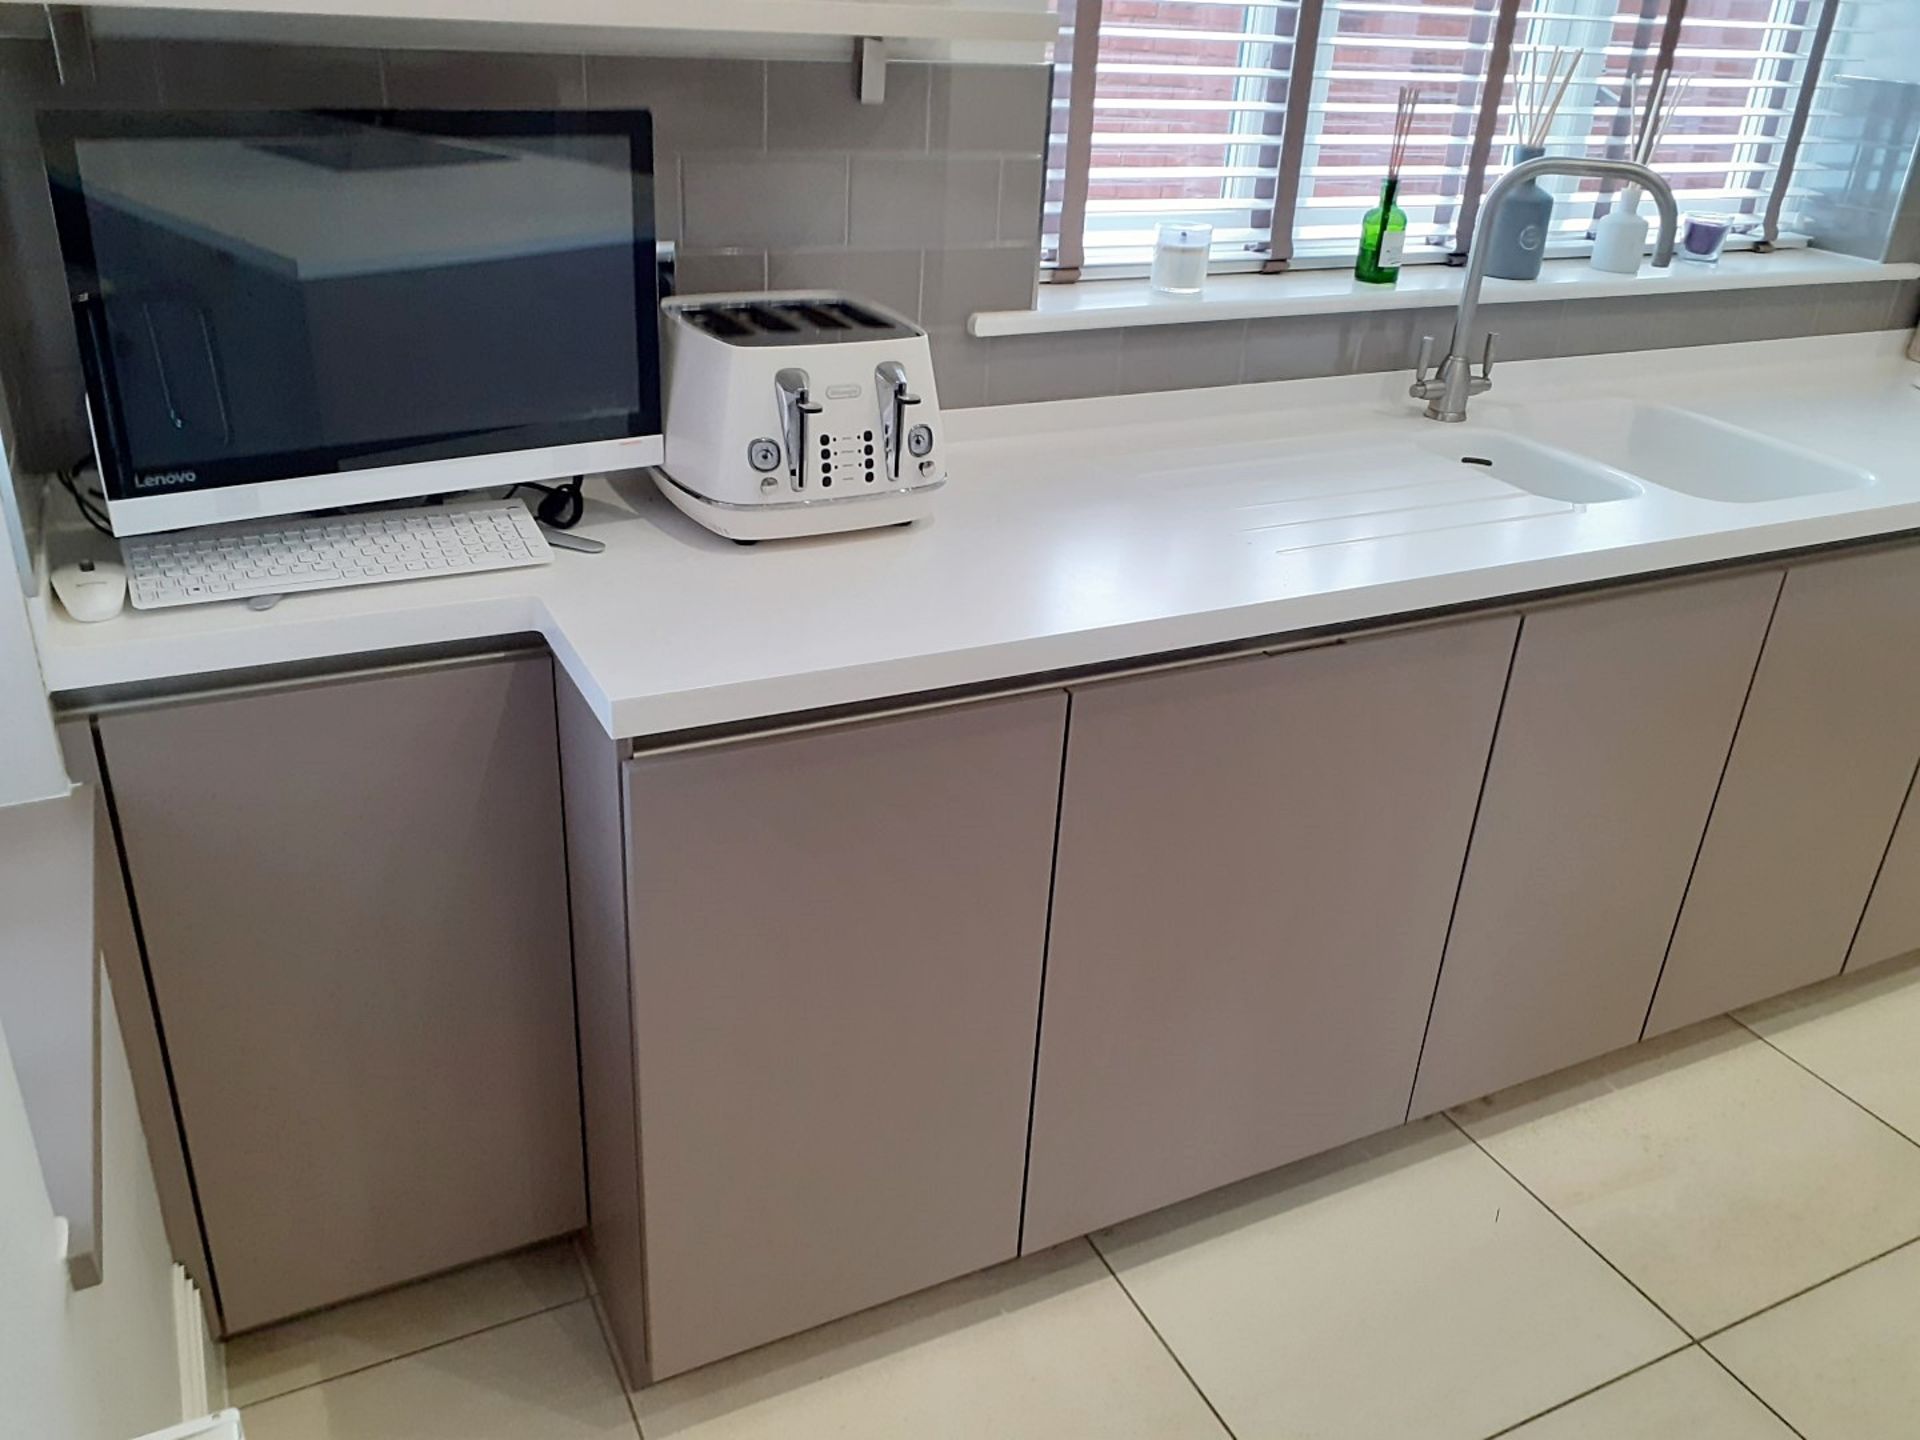 1 x SieMatic Handleless Fitted Kitchen With Intergrated NEFF Appliances, Corian Worktops And Island - Image 19 of 92